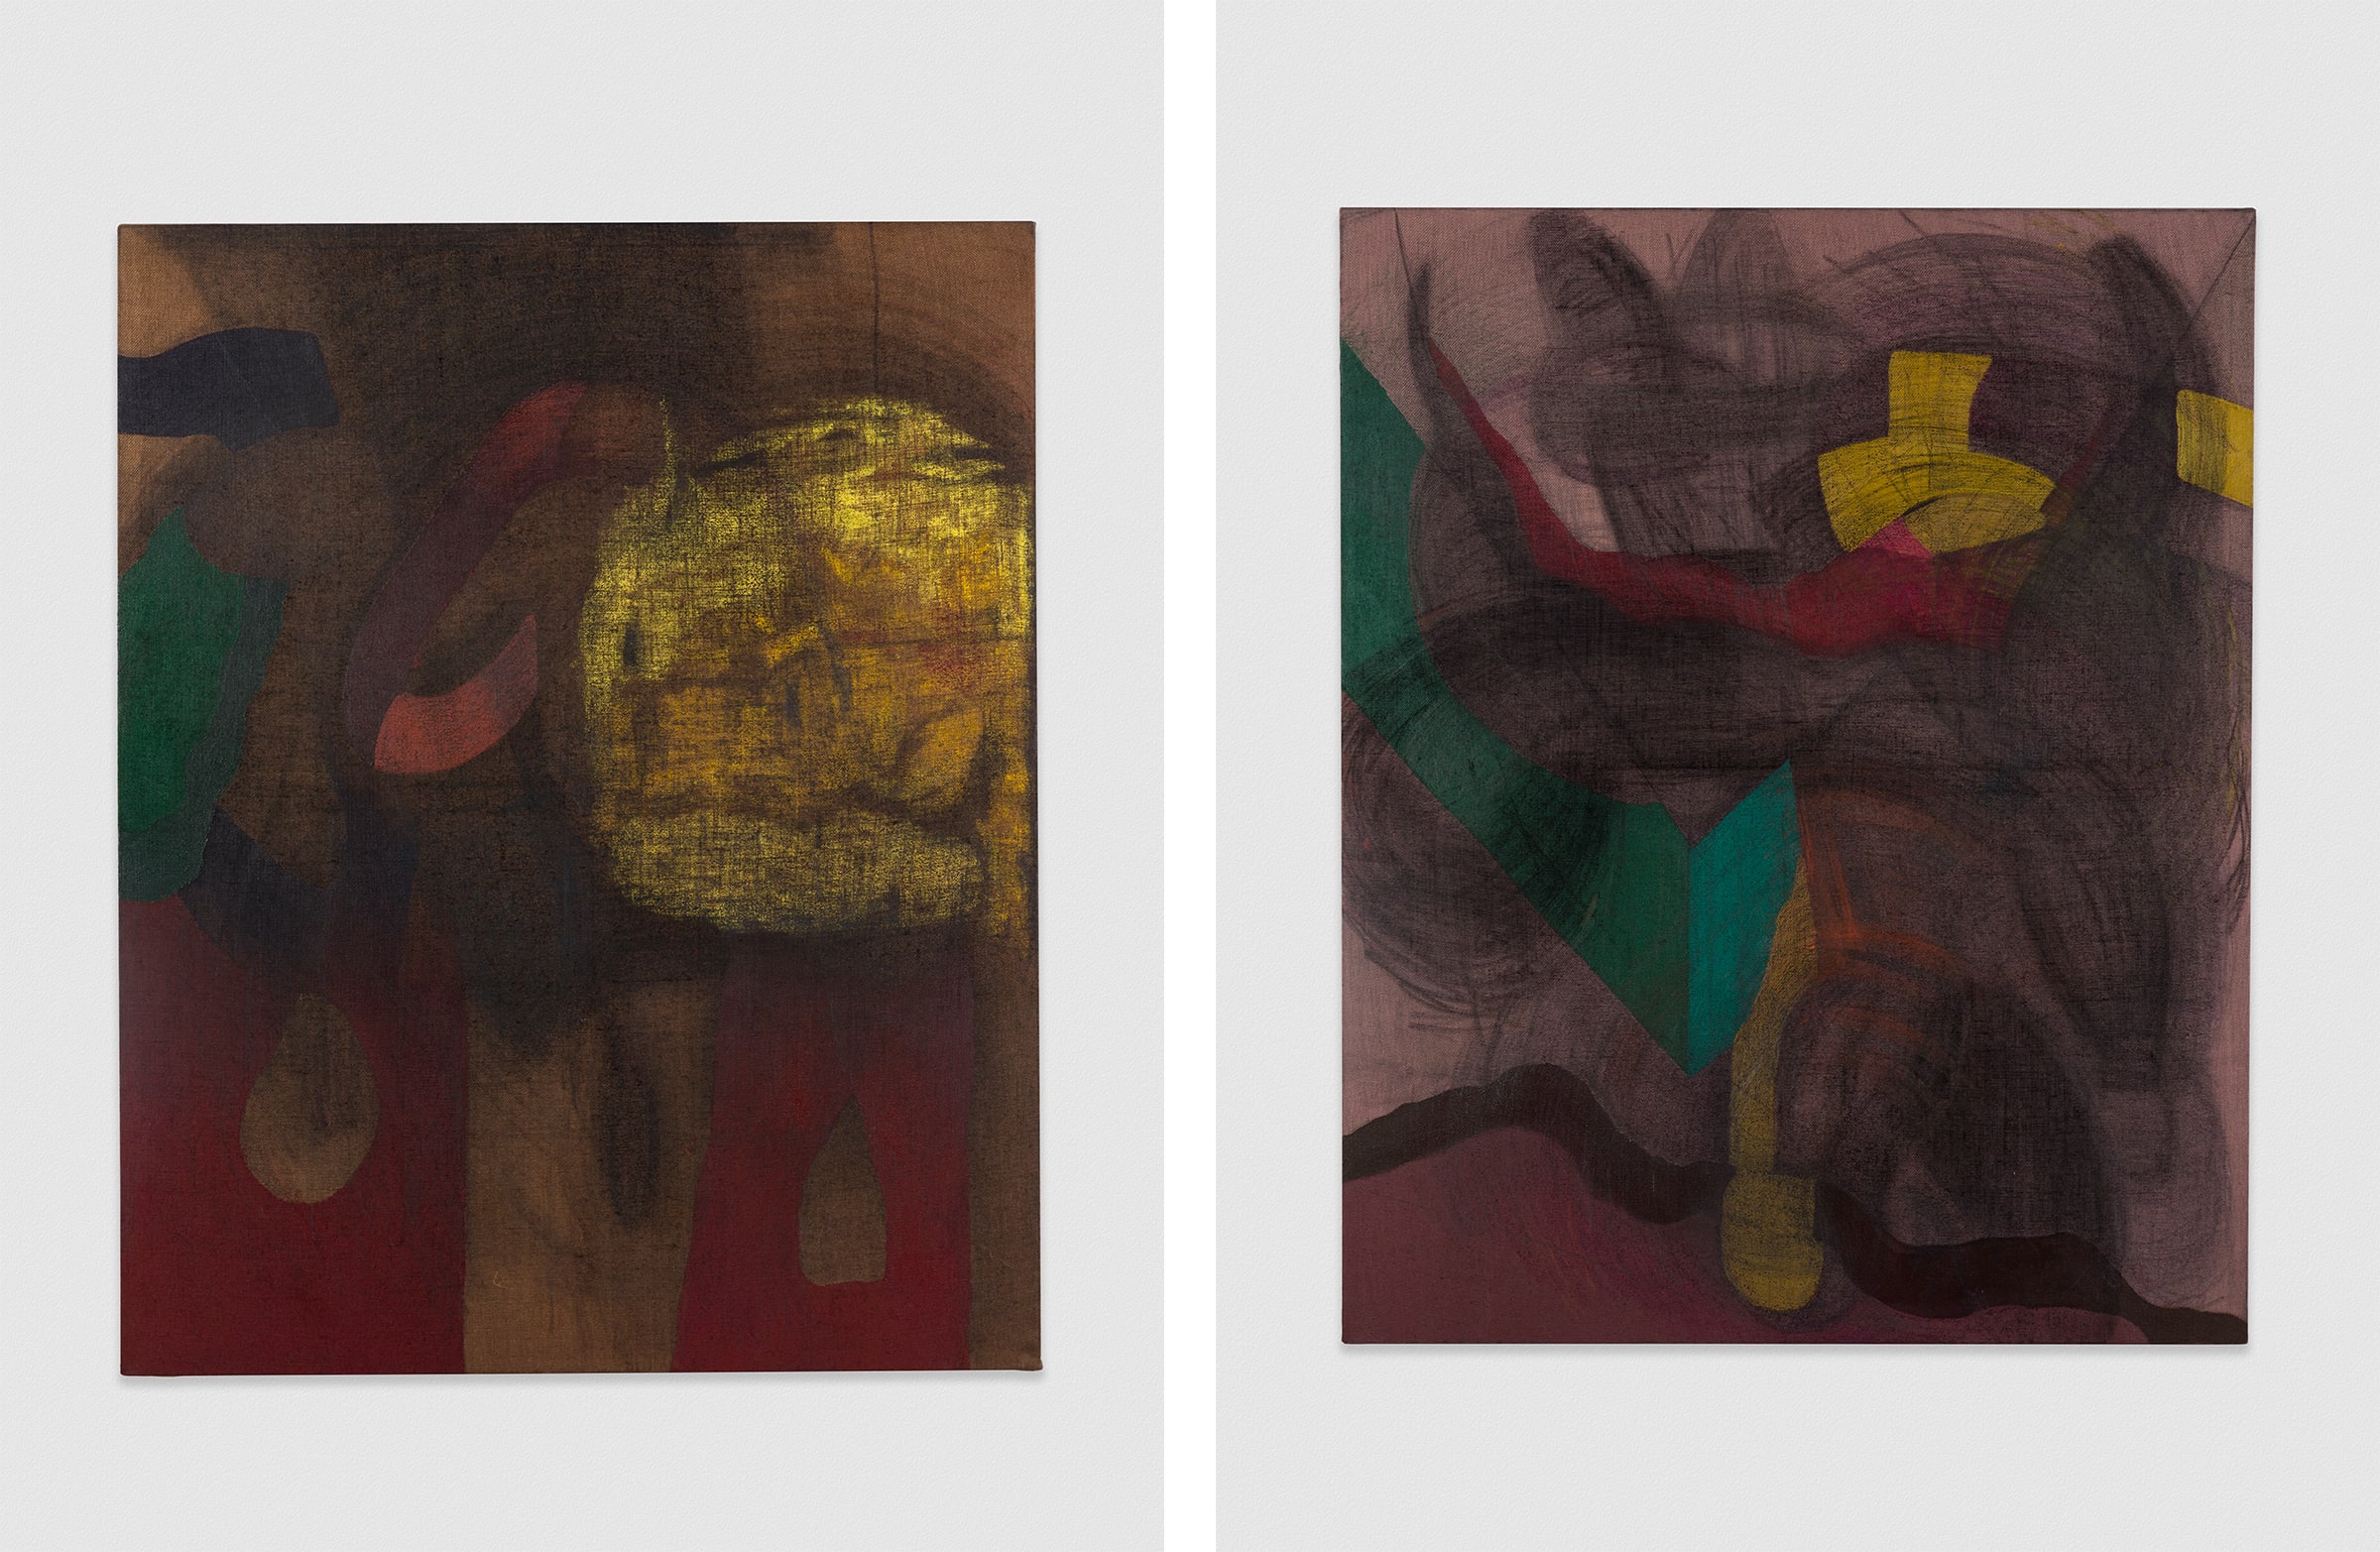 Left: Kaveri Raina, To Perceive Is to Suffer; Revisited, 2021–2022. Right: Kaveri Raina, Revolt; Internal Brewing Slow Rage, 2021. Courtesy of the artist and Patron.